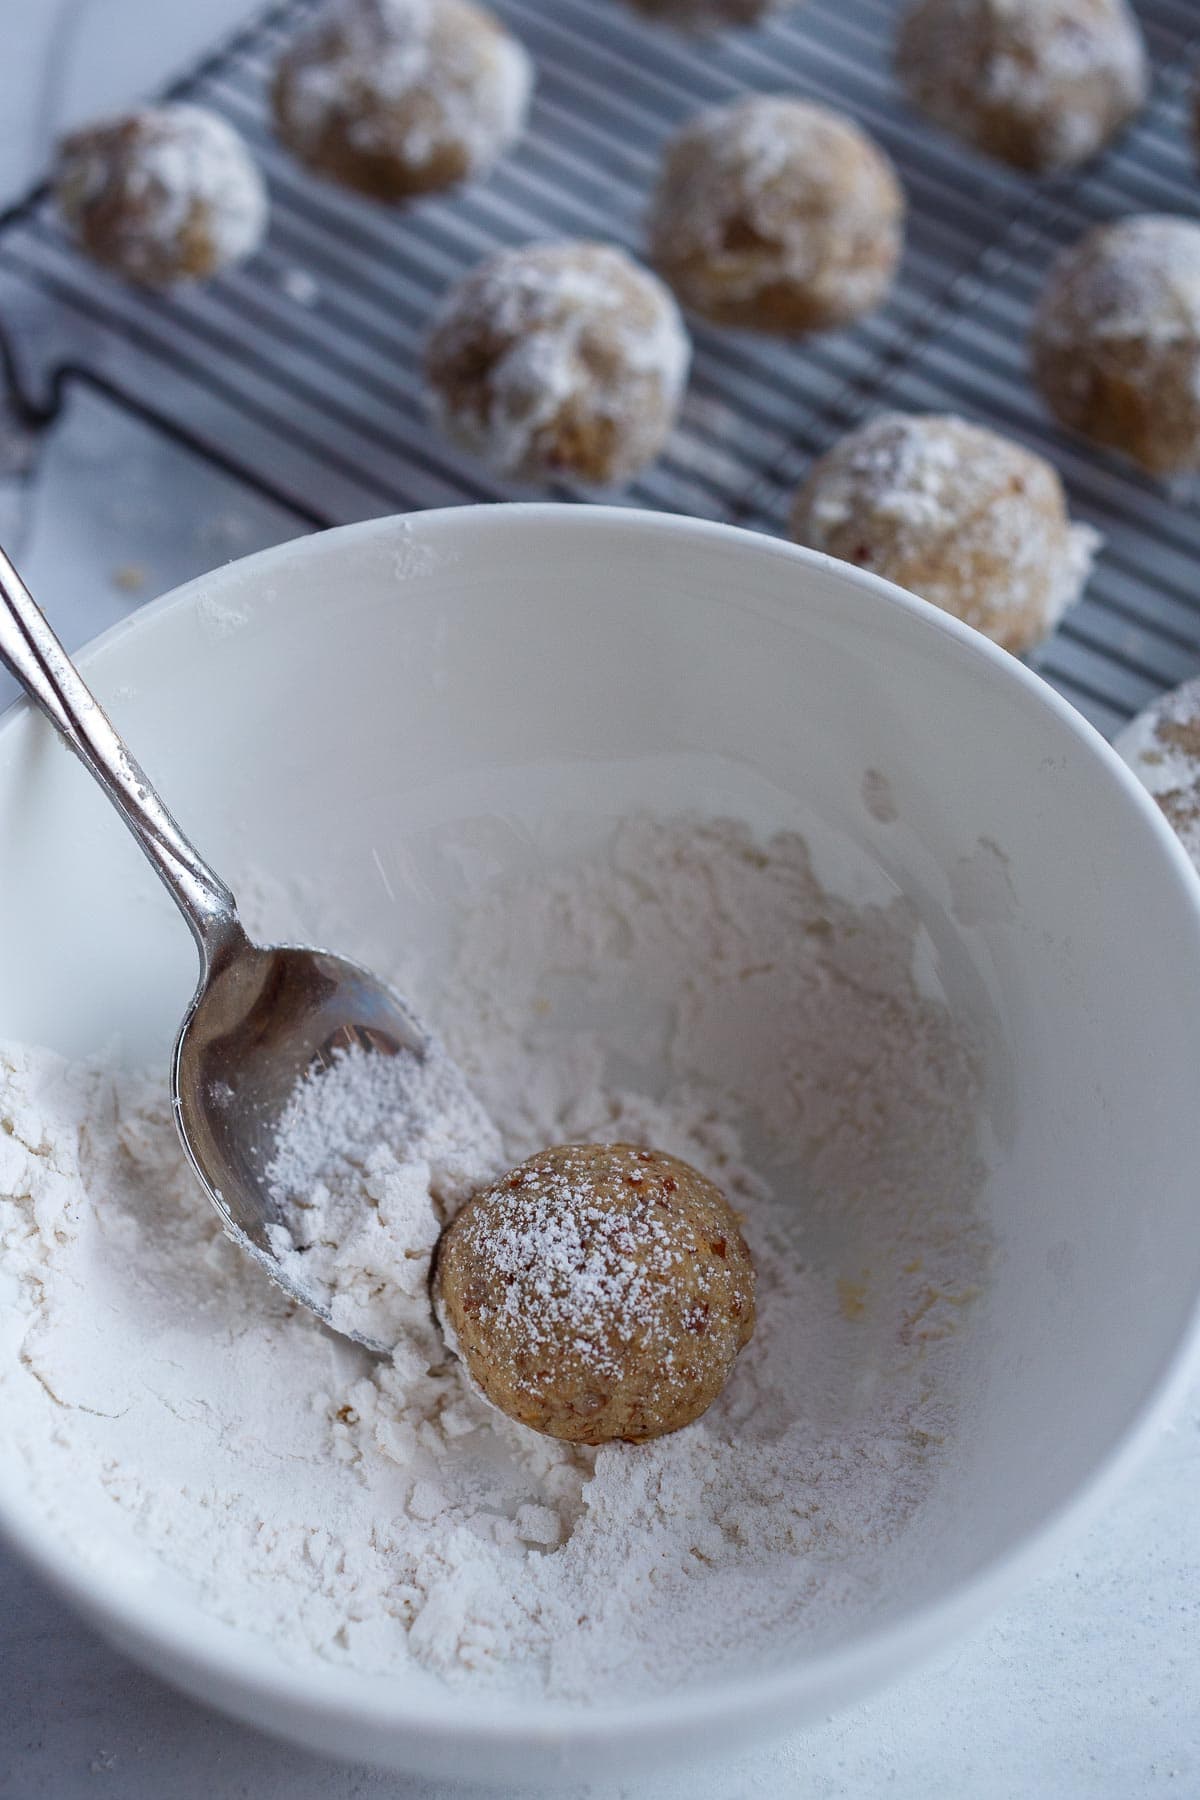 Warm cookies in a bowl of powdered sugar.